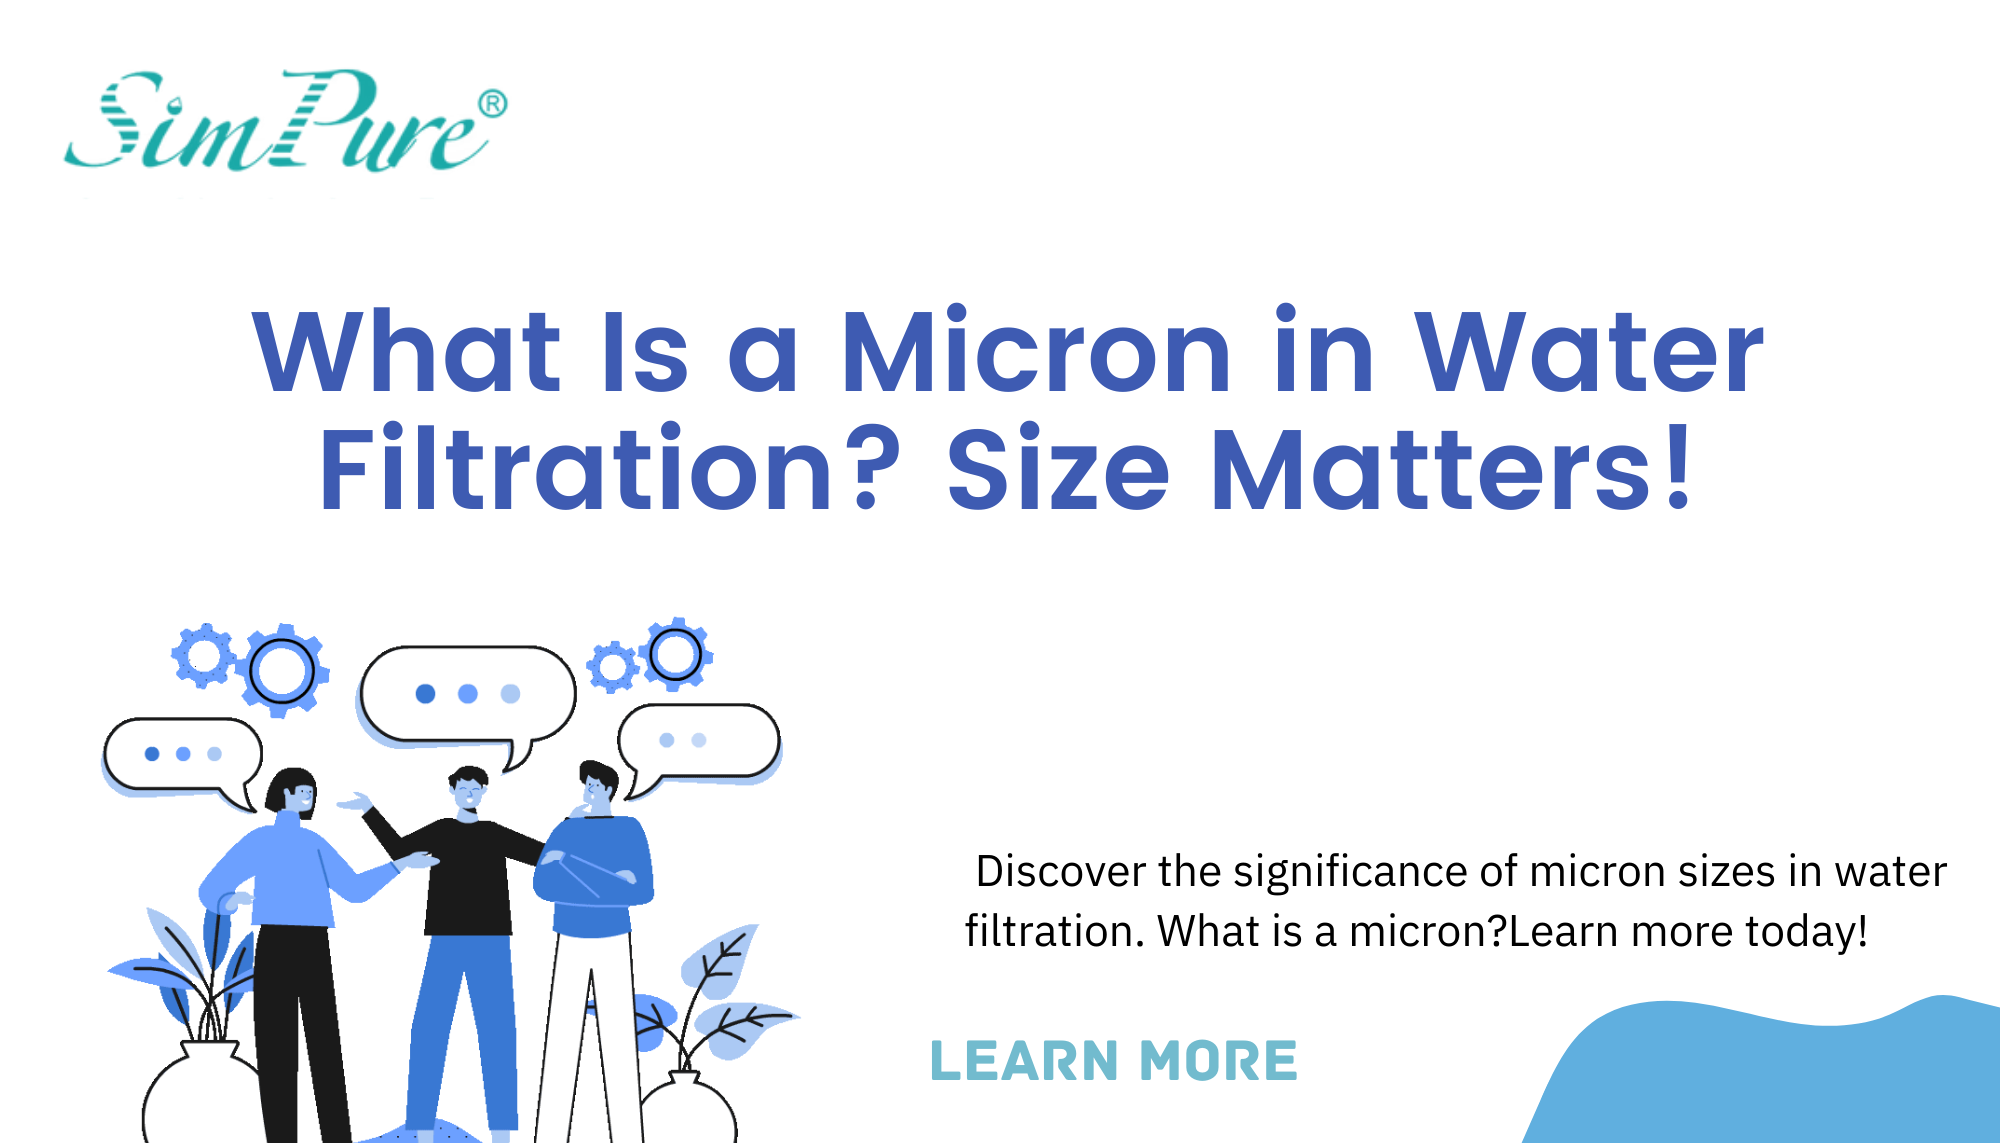 What Is a Micron in Water Filtration? Size Matters!